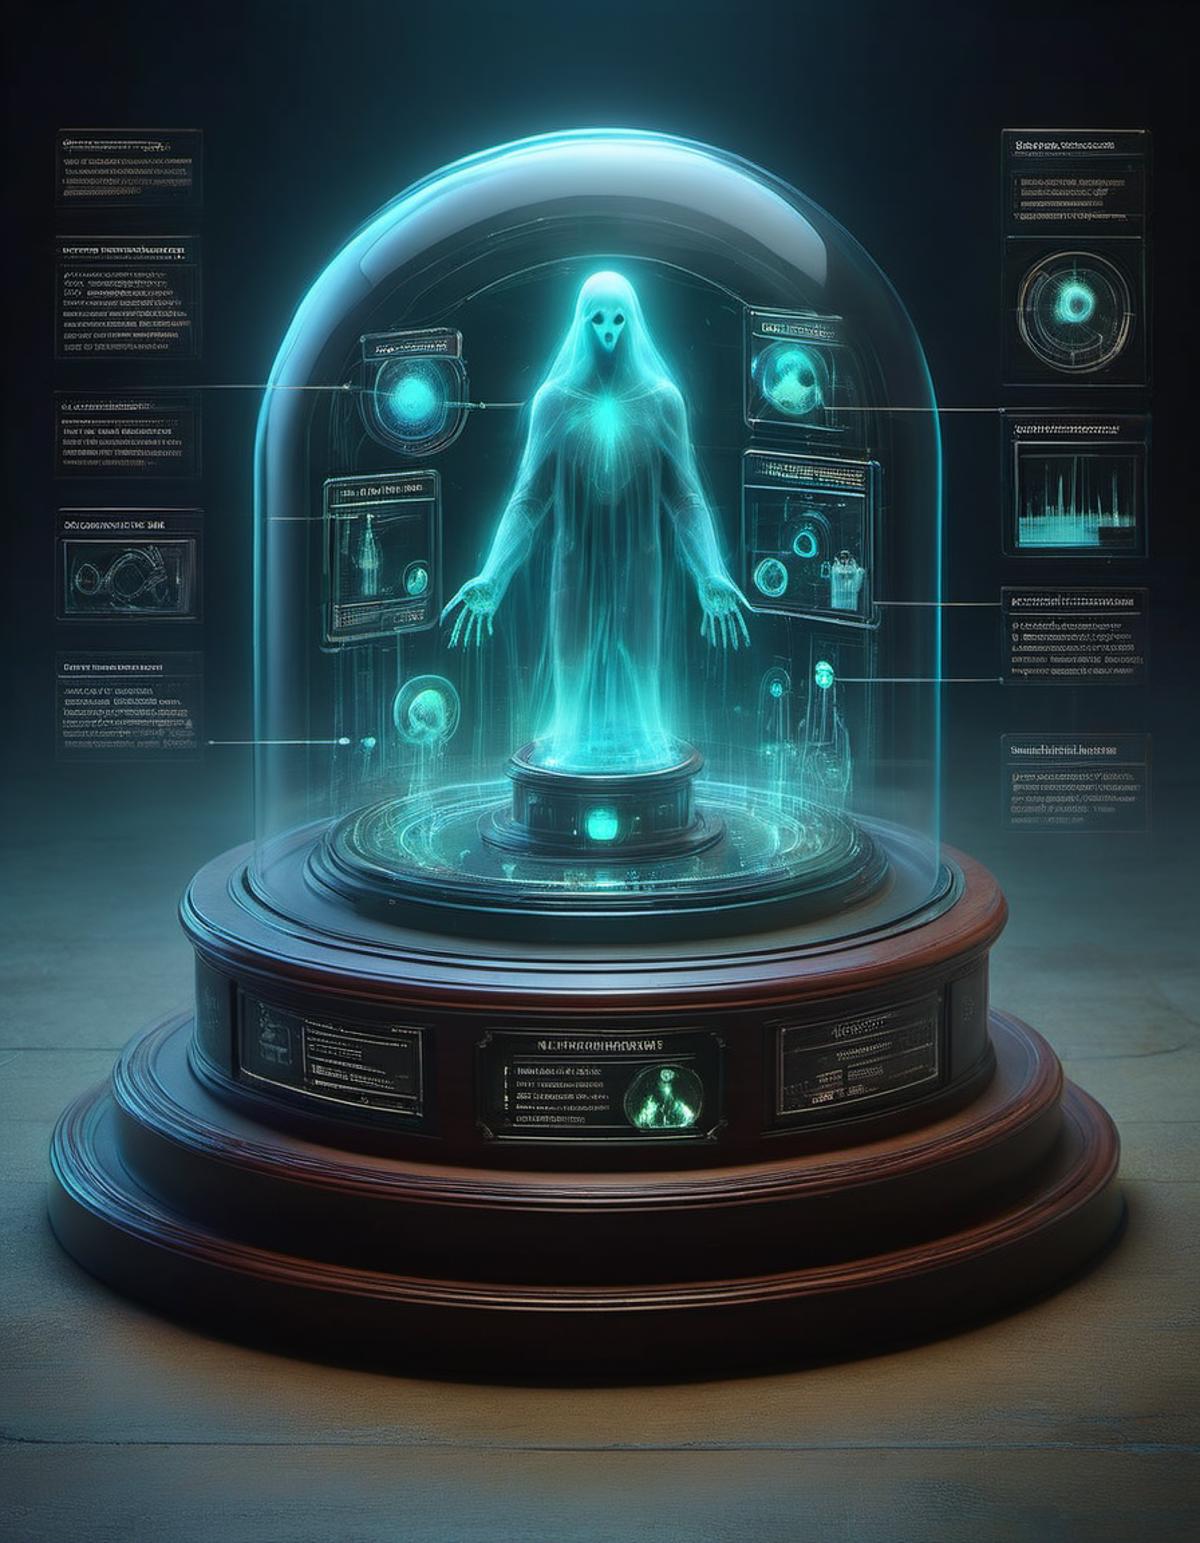 rounded domed top display case with a glowing ectoplasmic aether ghost in a darkened ghost busters laboratory environment